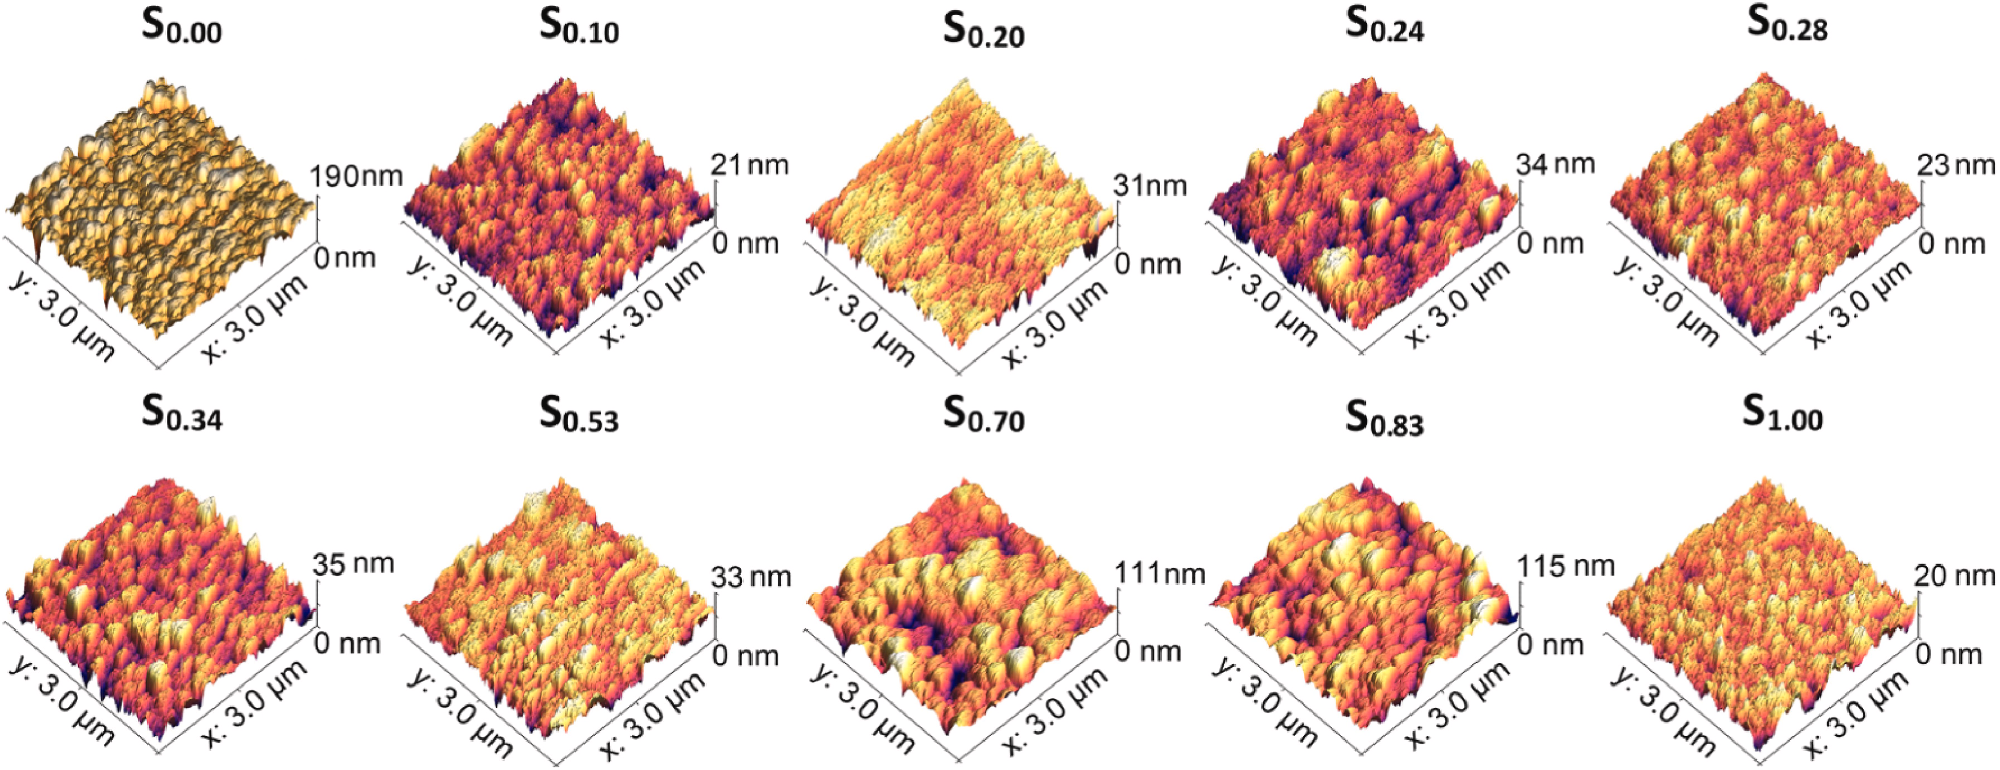 AFM micrographs of ex-situ heat treated Ti–Au thin films deposited on glass substrates with increasing Au composition.